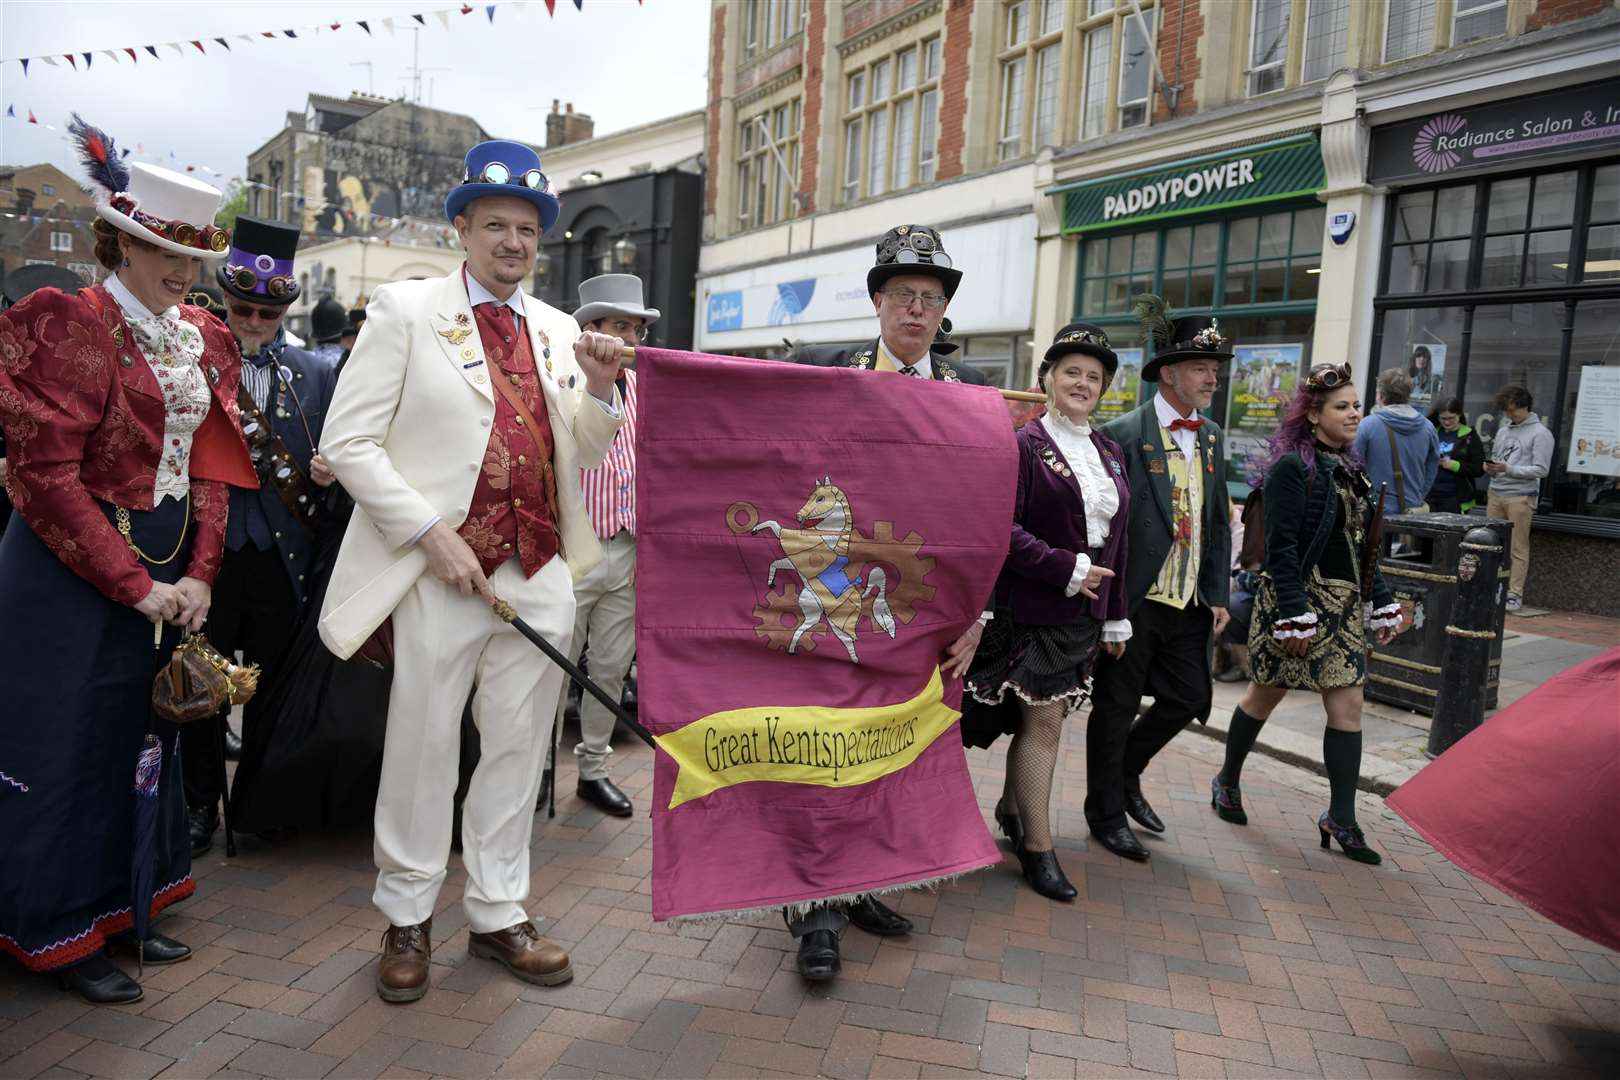 Scores of people in fancy dress took part in the parade through Rochester High Street. Picture: Barry Goodwin